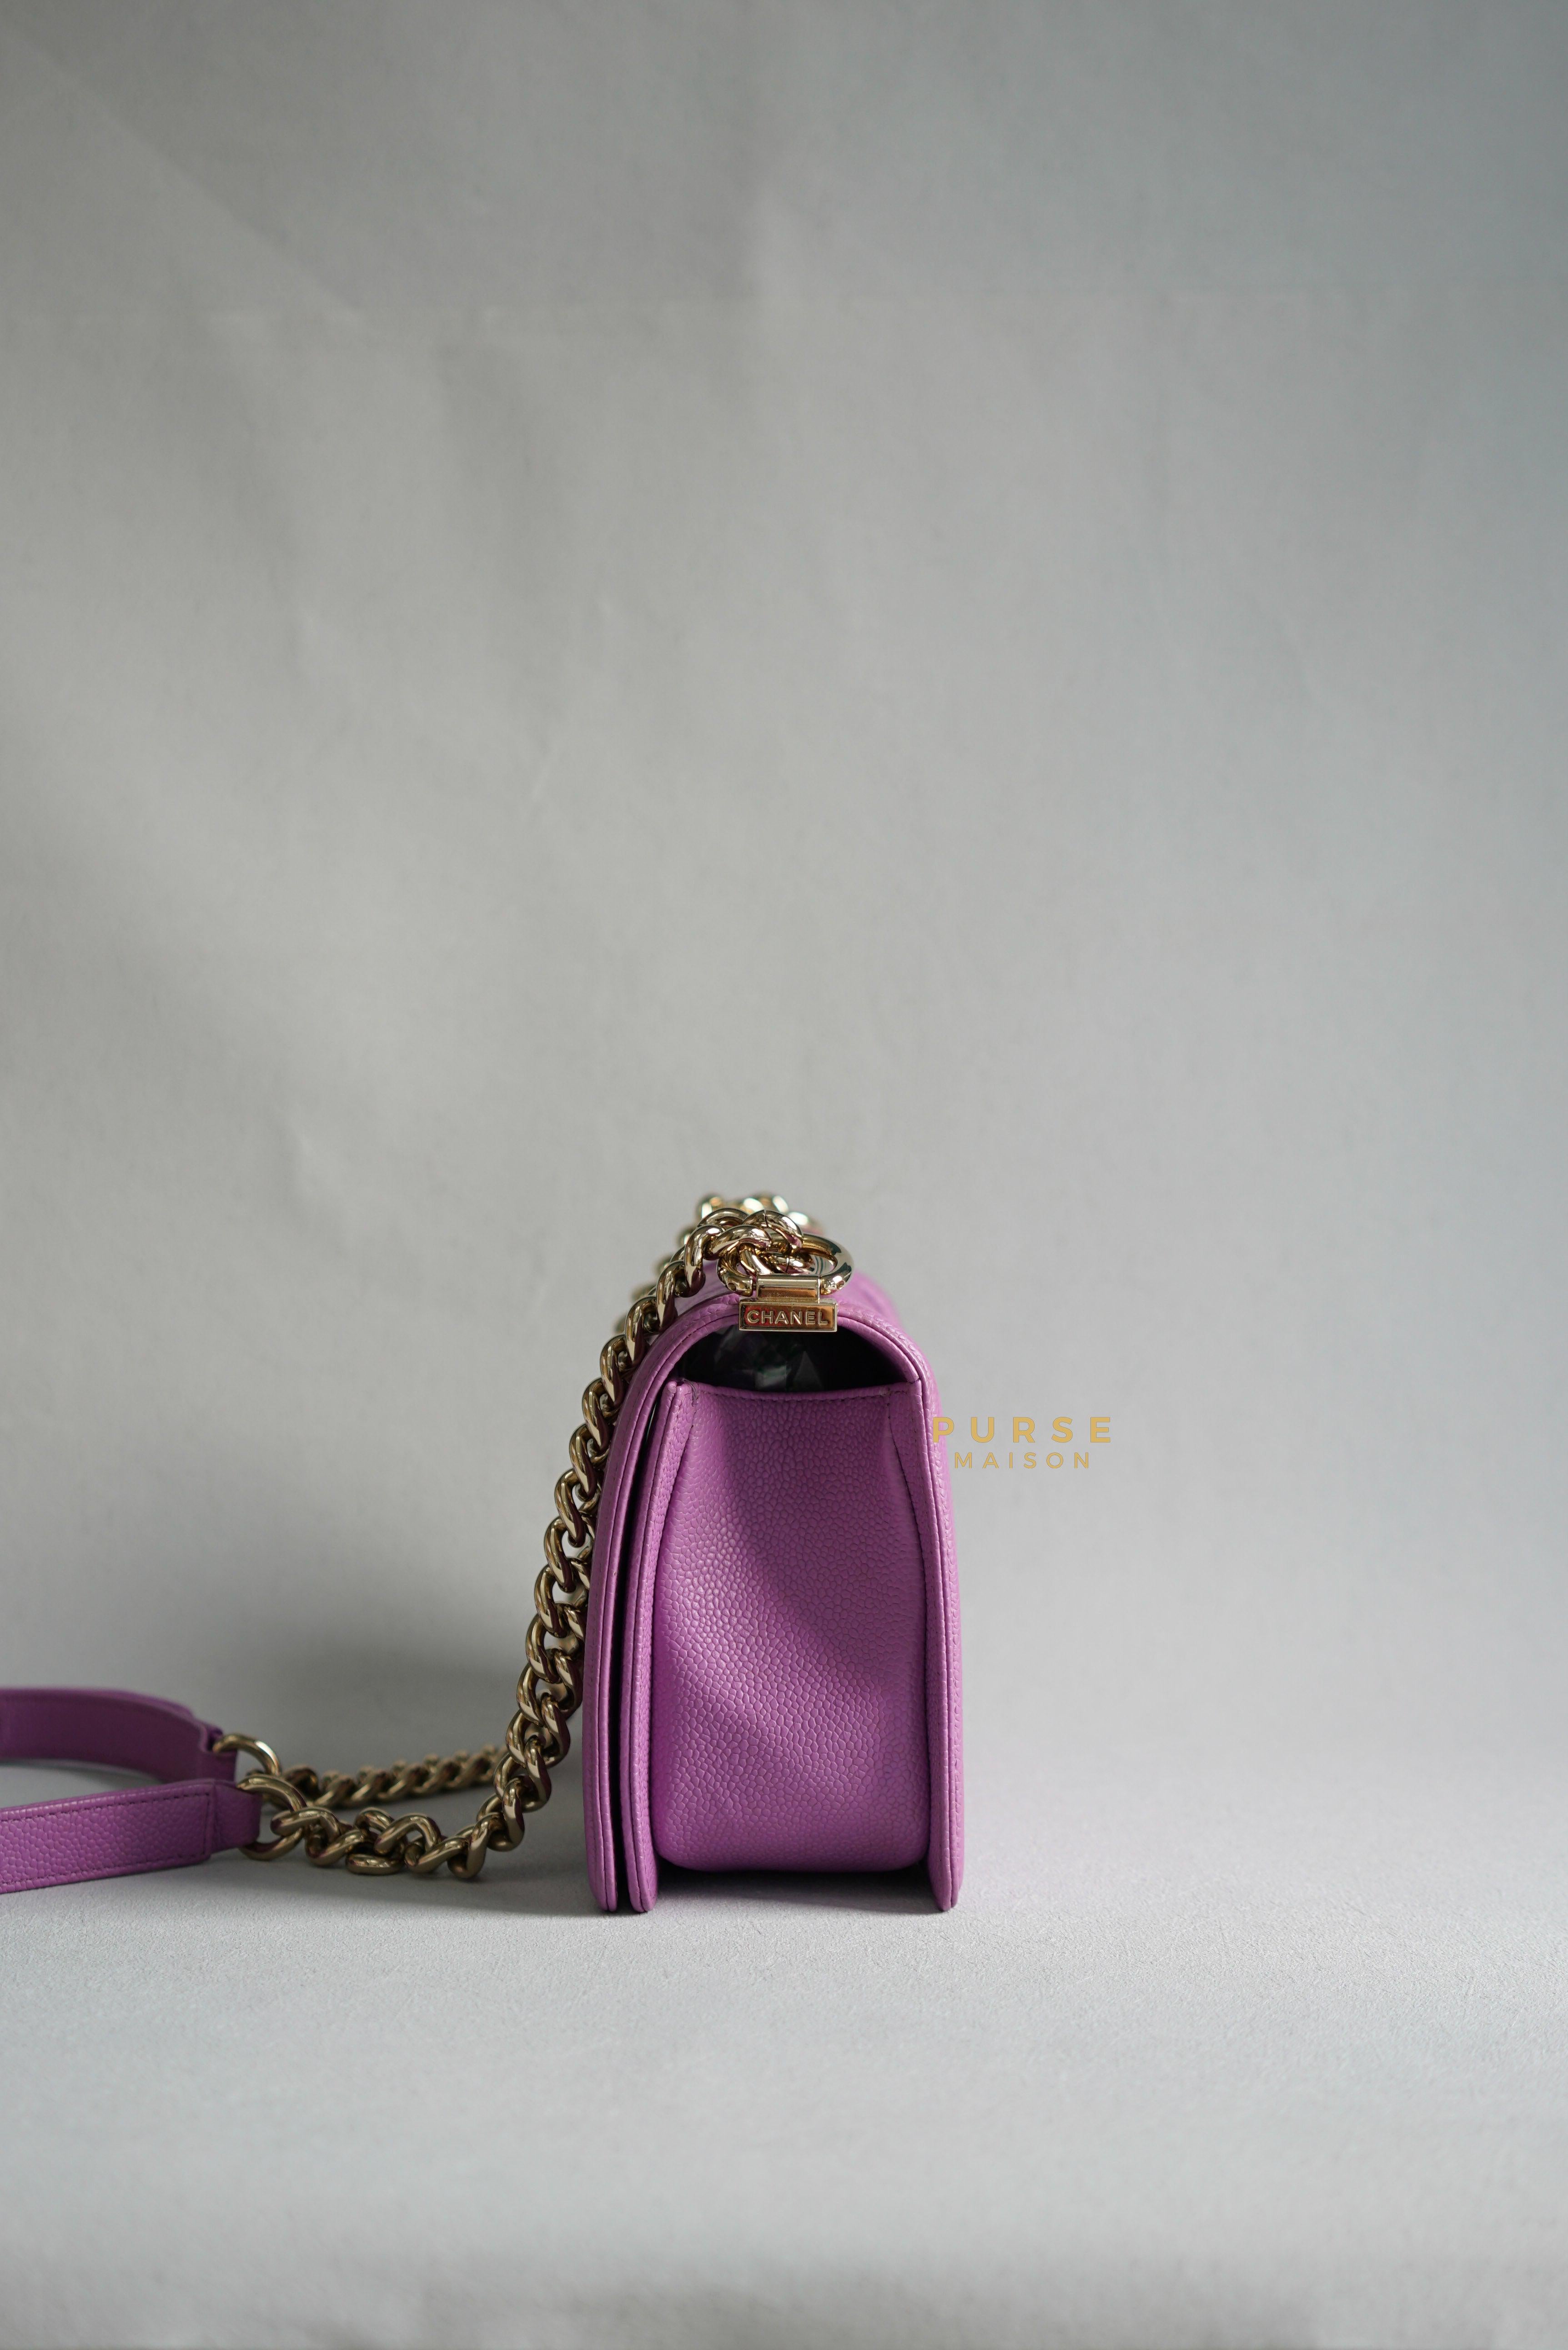 Chanel Boy Old Medium in Purple Caviar Leather and Light Gold Hardware (Series 29) | Purse Maison Luxury Bags Shop